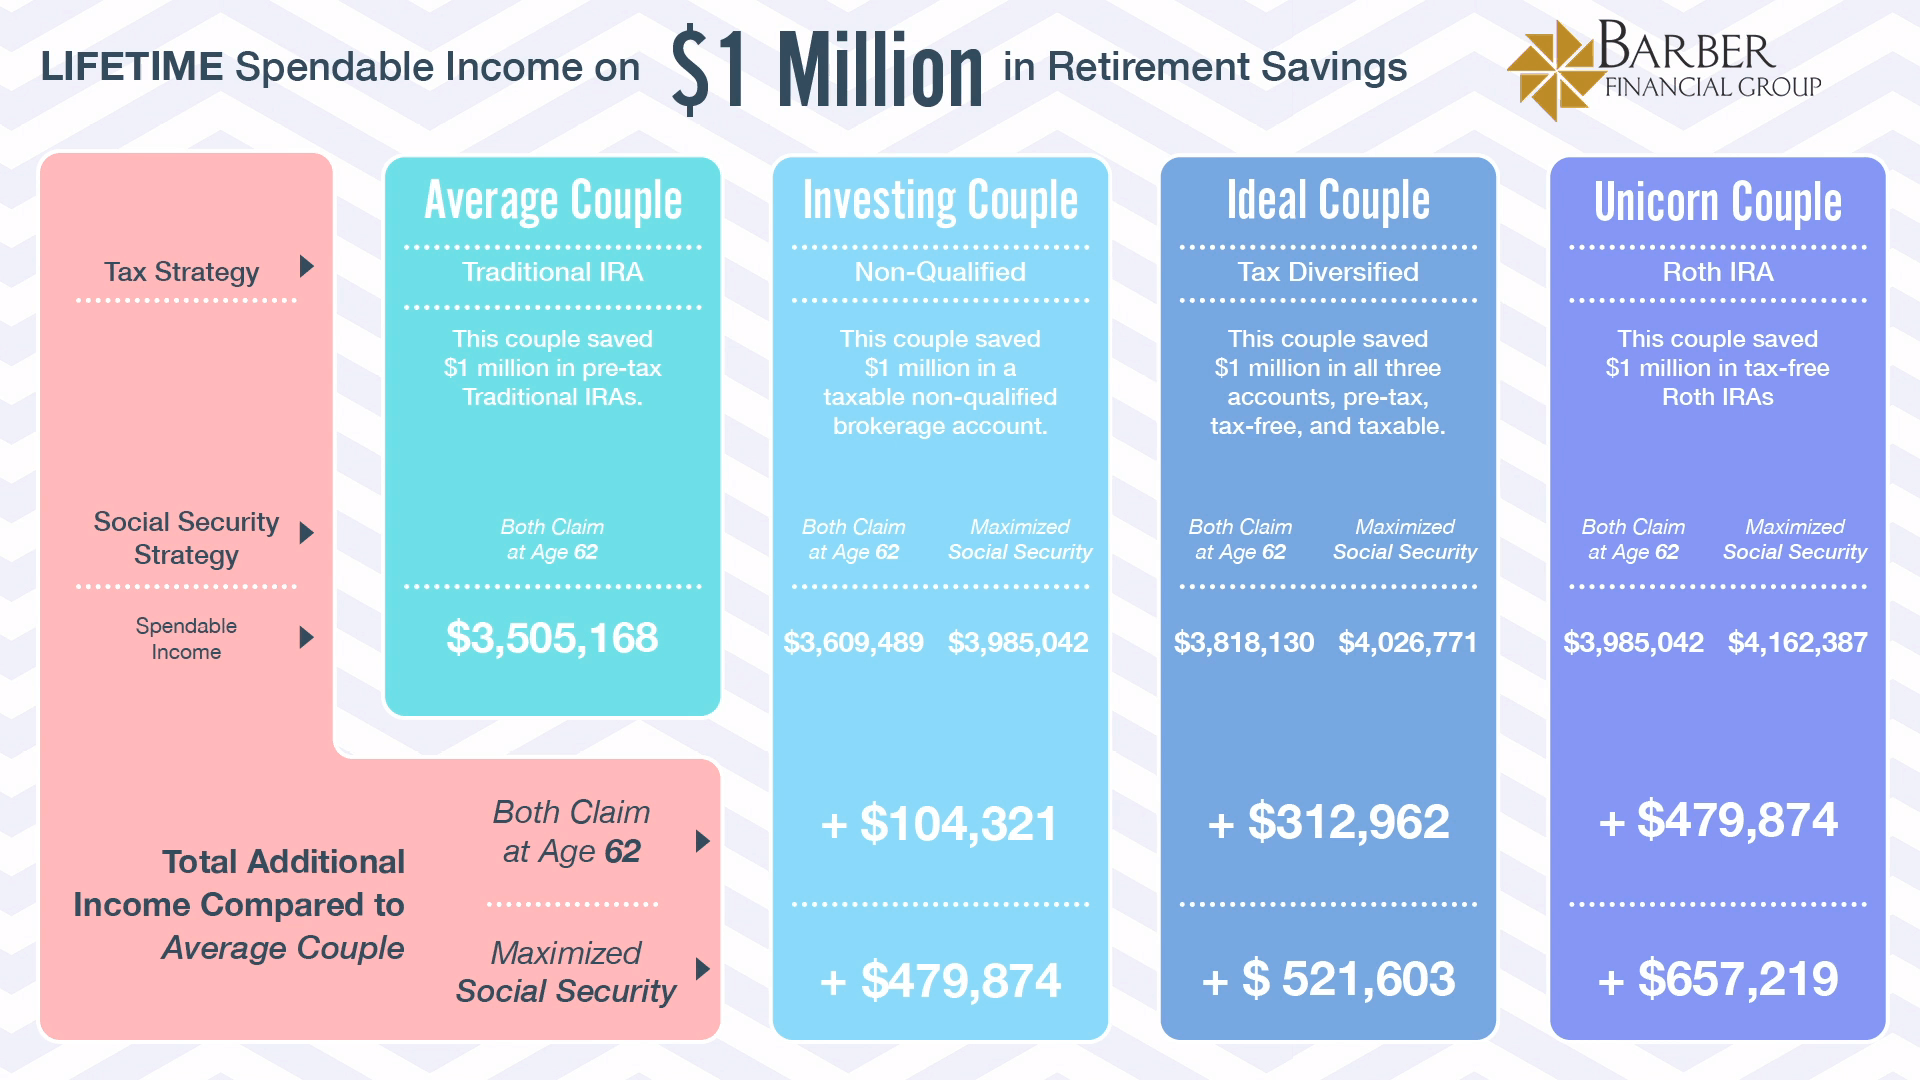 How $750k Can Go as Far as $1 Million in Retirement - Lifetime Income Retiring with $1 Million